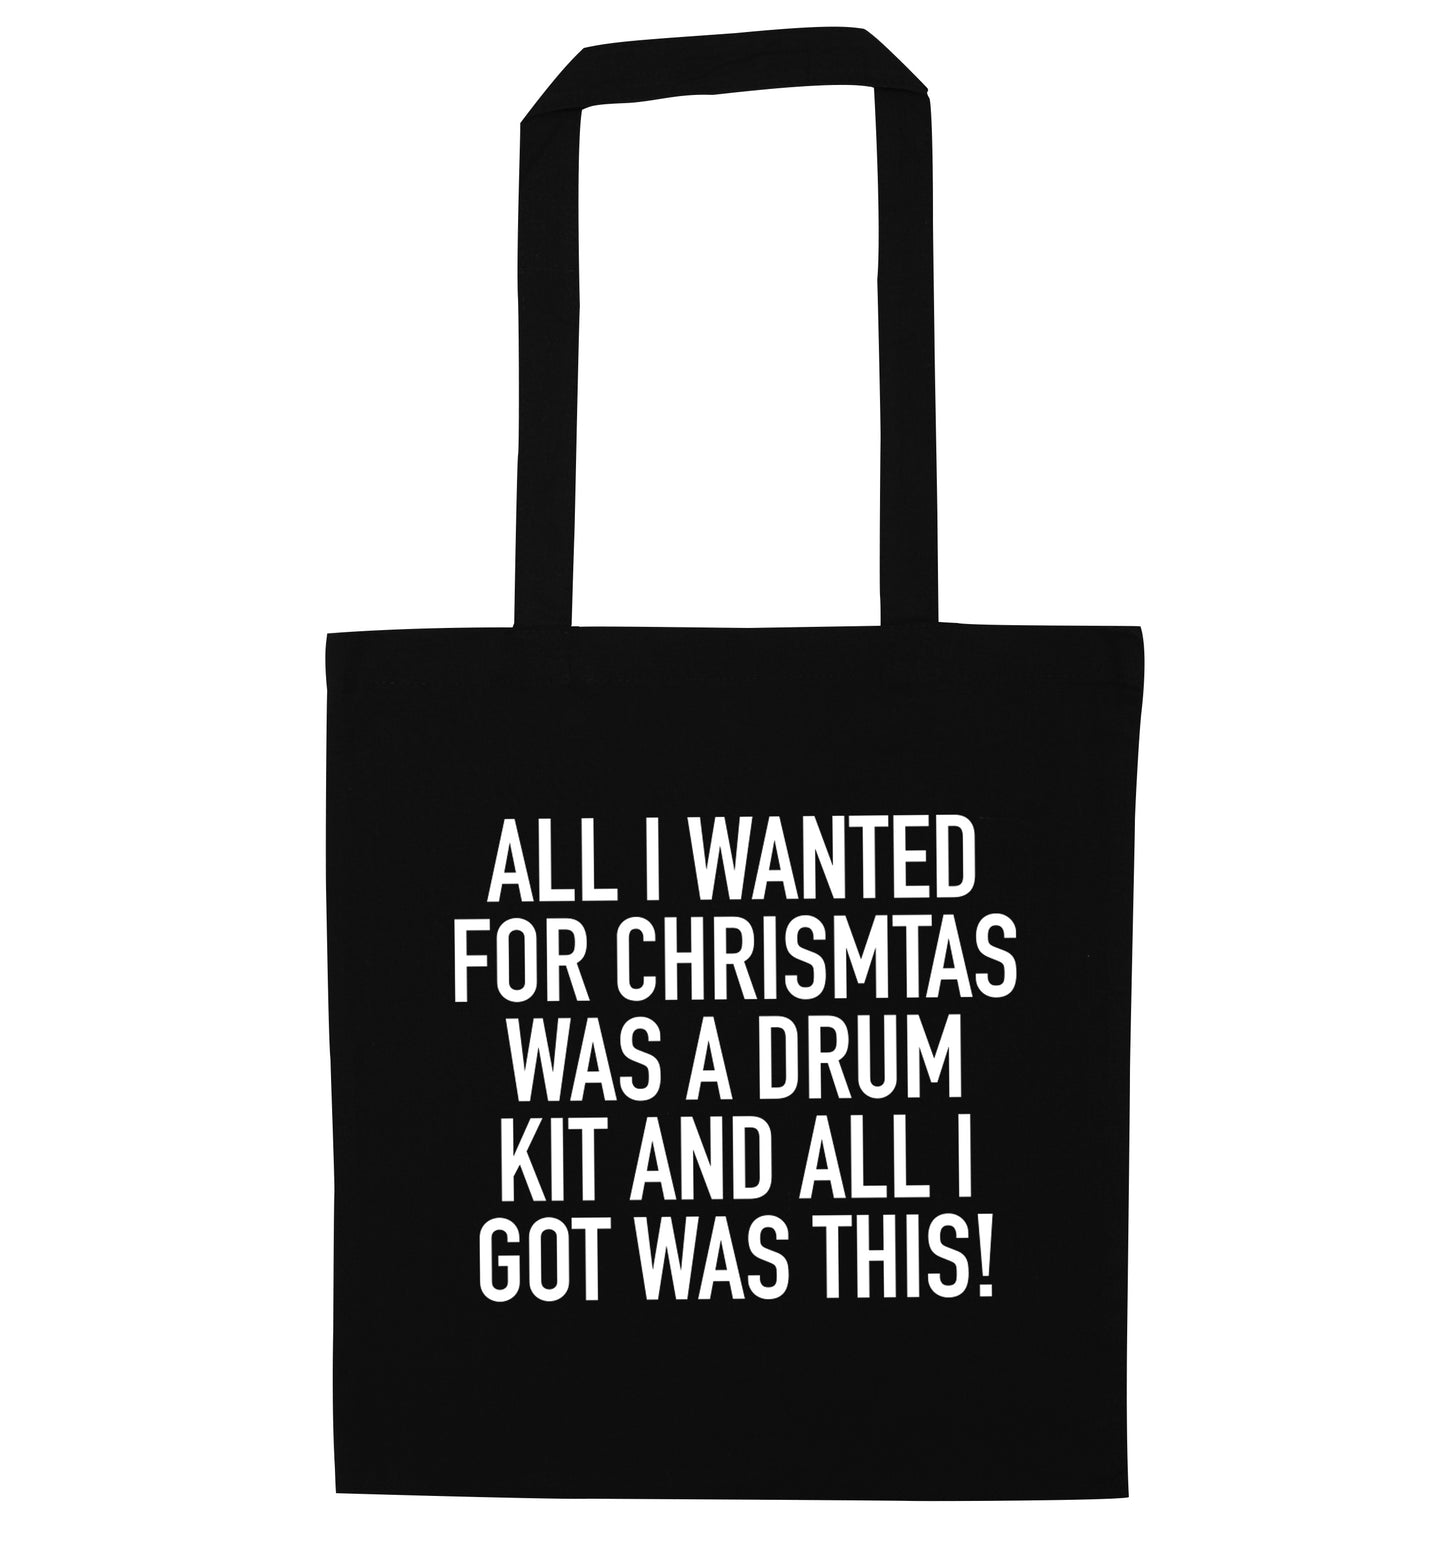 All I wanted for Christmas was a drum kit and all I got was this! black tote bag